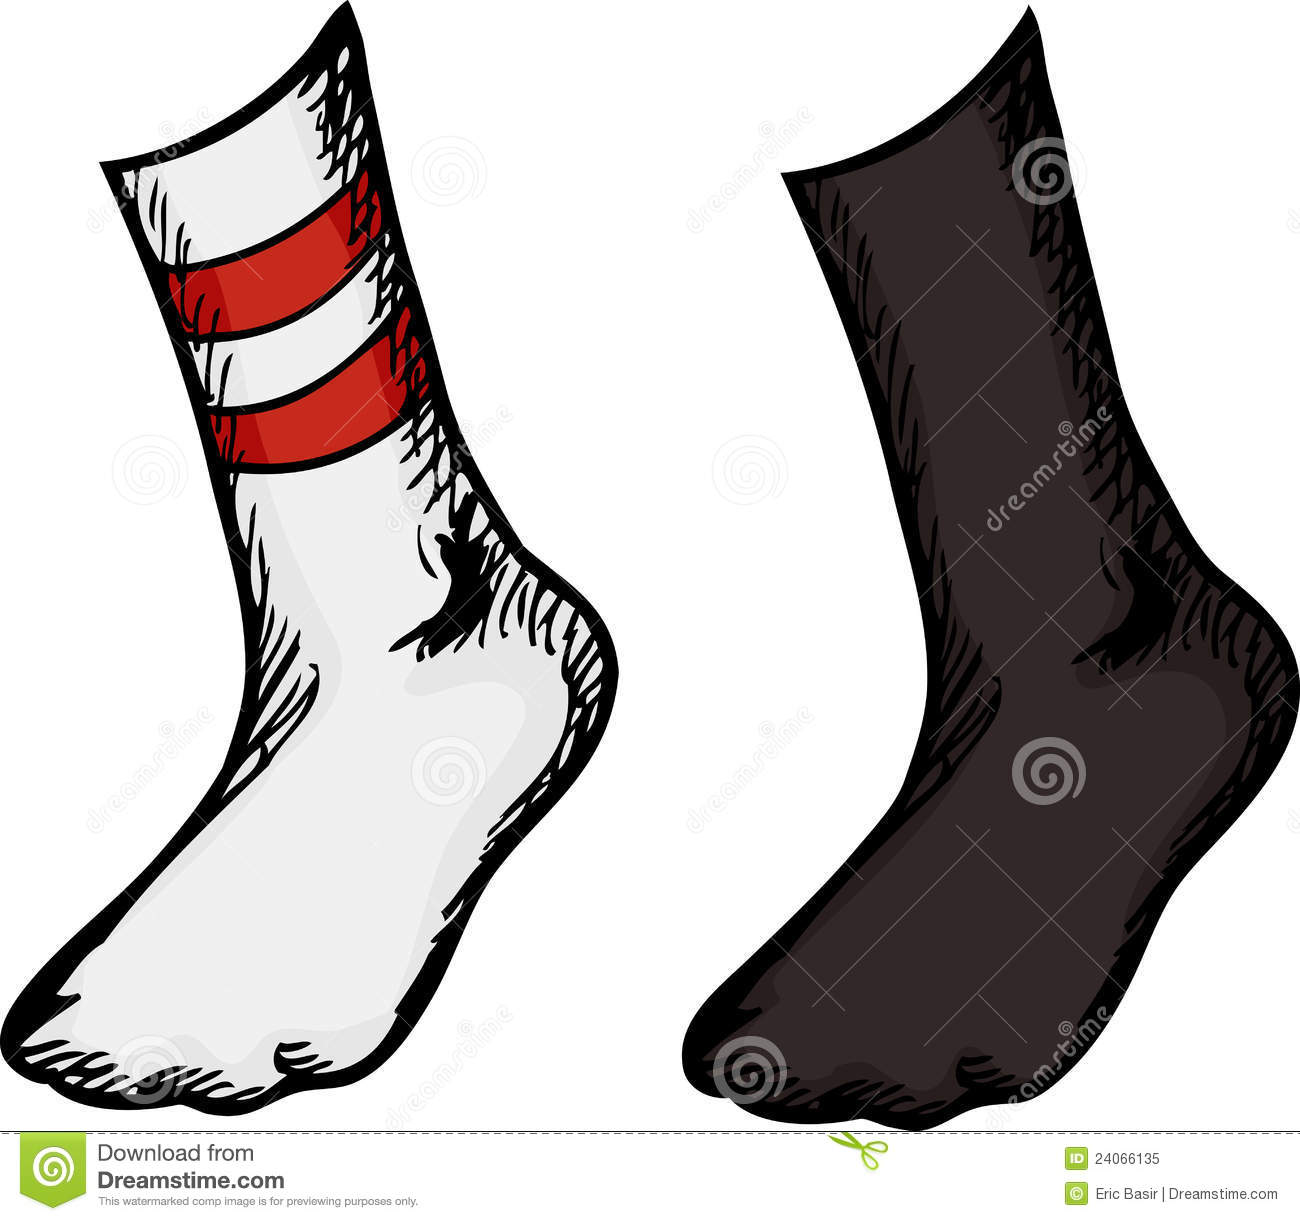 Socks With Feet In Them Royalty Free Stock Photo   Image  24066135